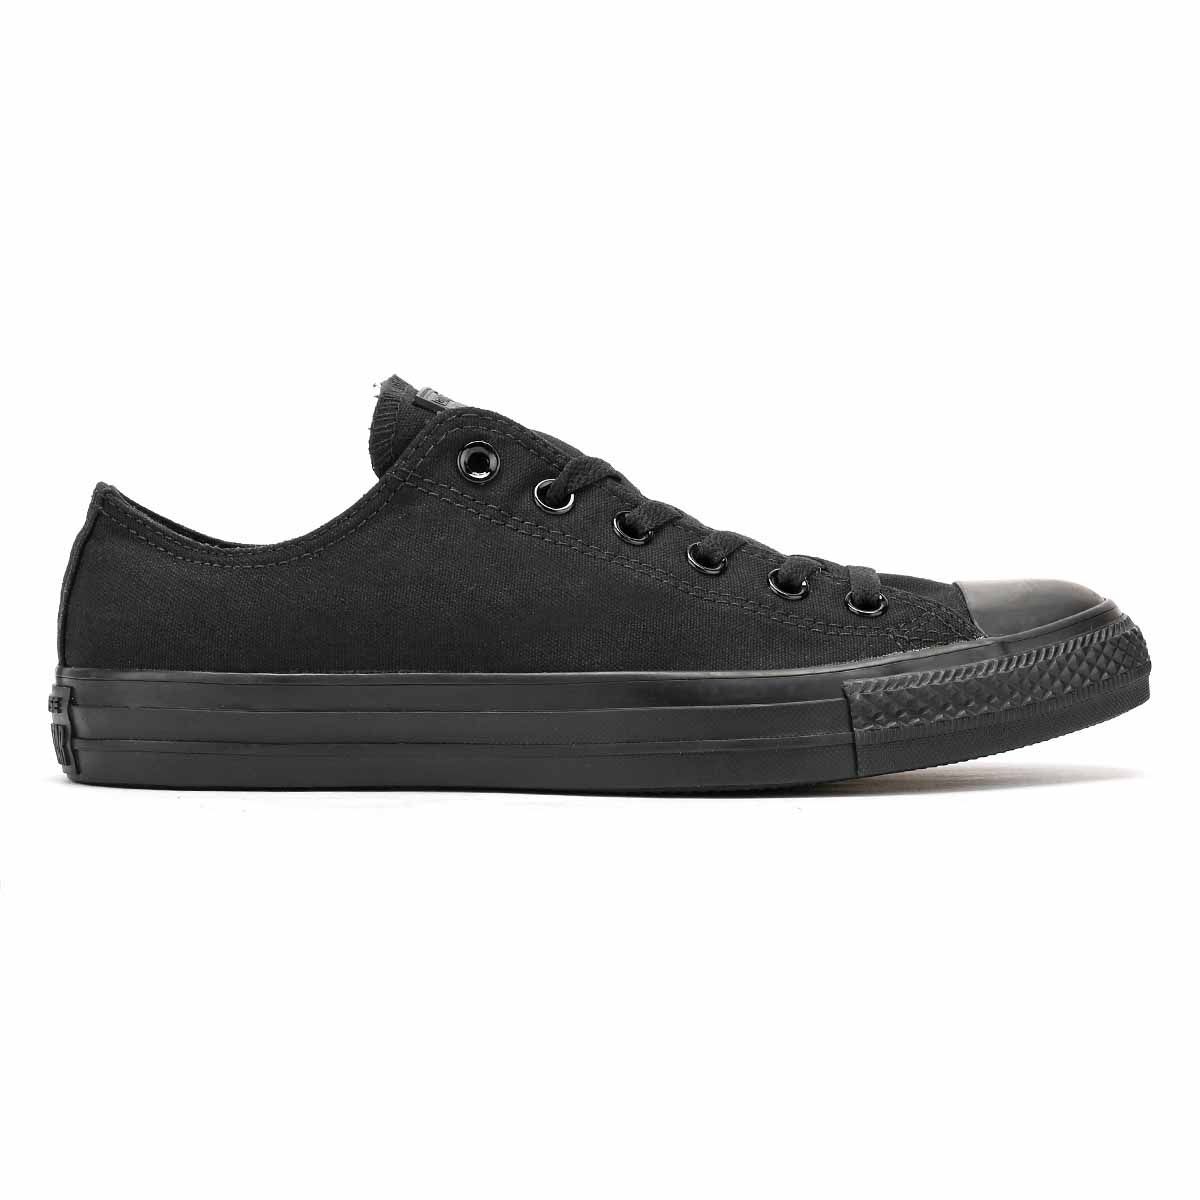 The monochrome from Converse its not your ordinary Converse. The black canvas upper has a matching rubber sole with the unmistakable diamond tread. It also has the All Star label and matching branding on the heel.